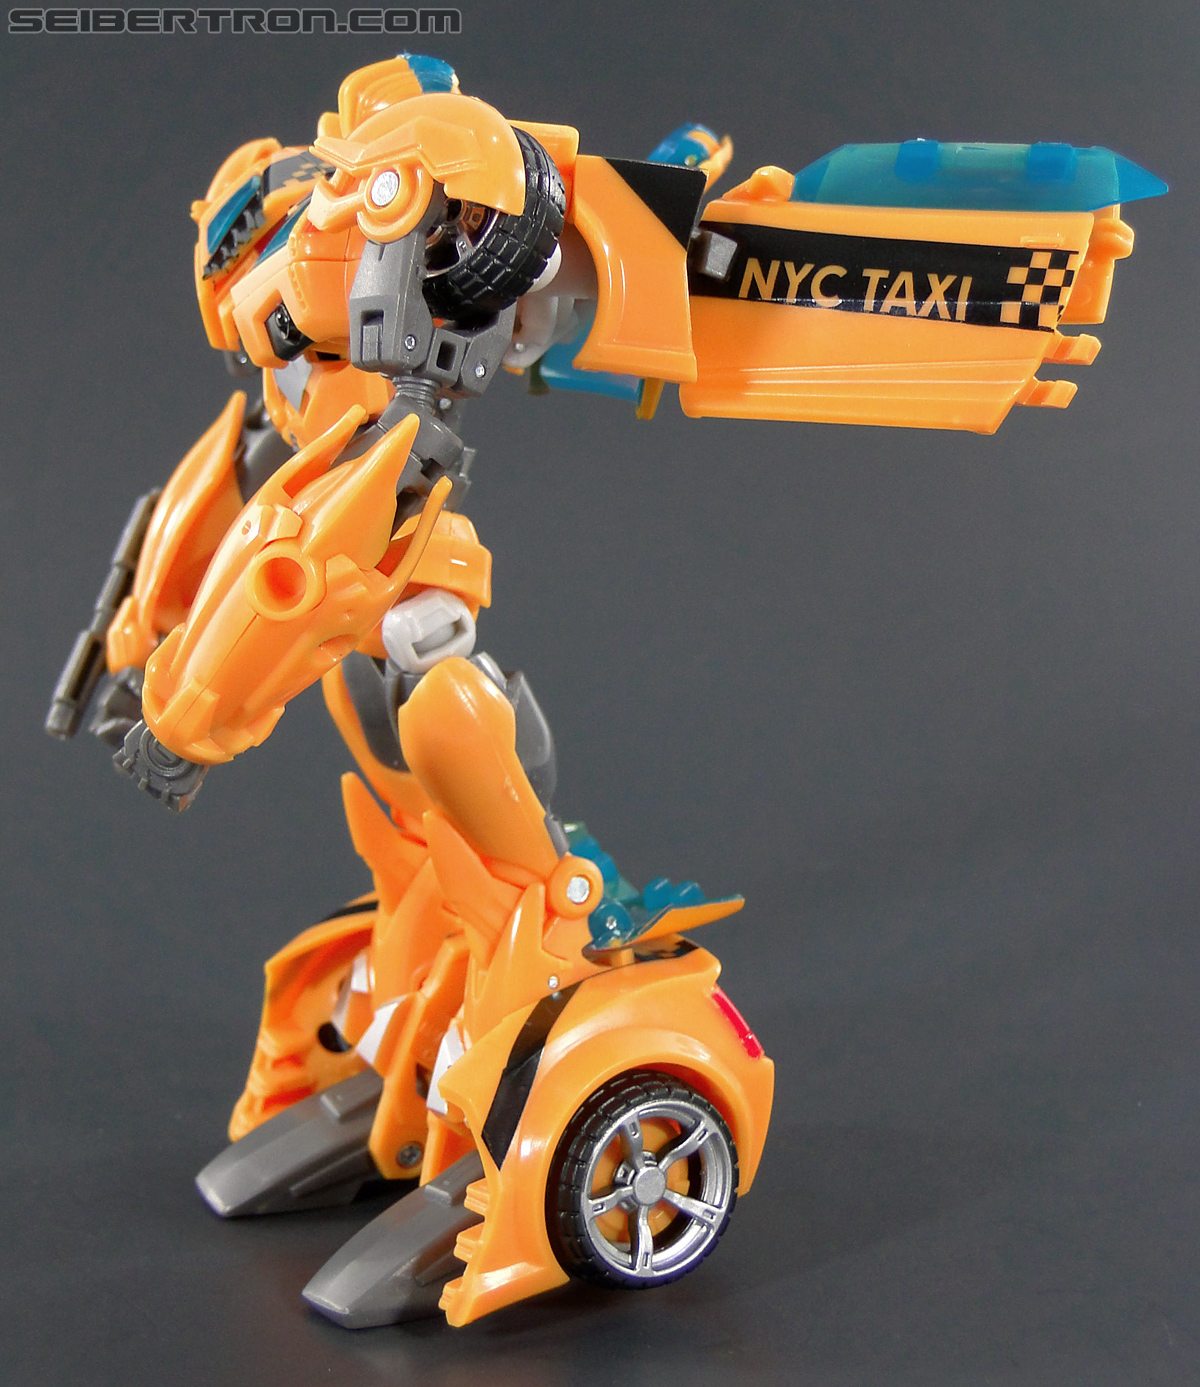 Transformers Prime: First Edition Bumblebee (NYCC) (Image #130 of 185)